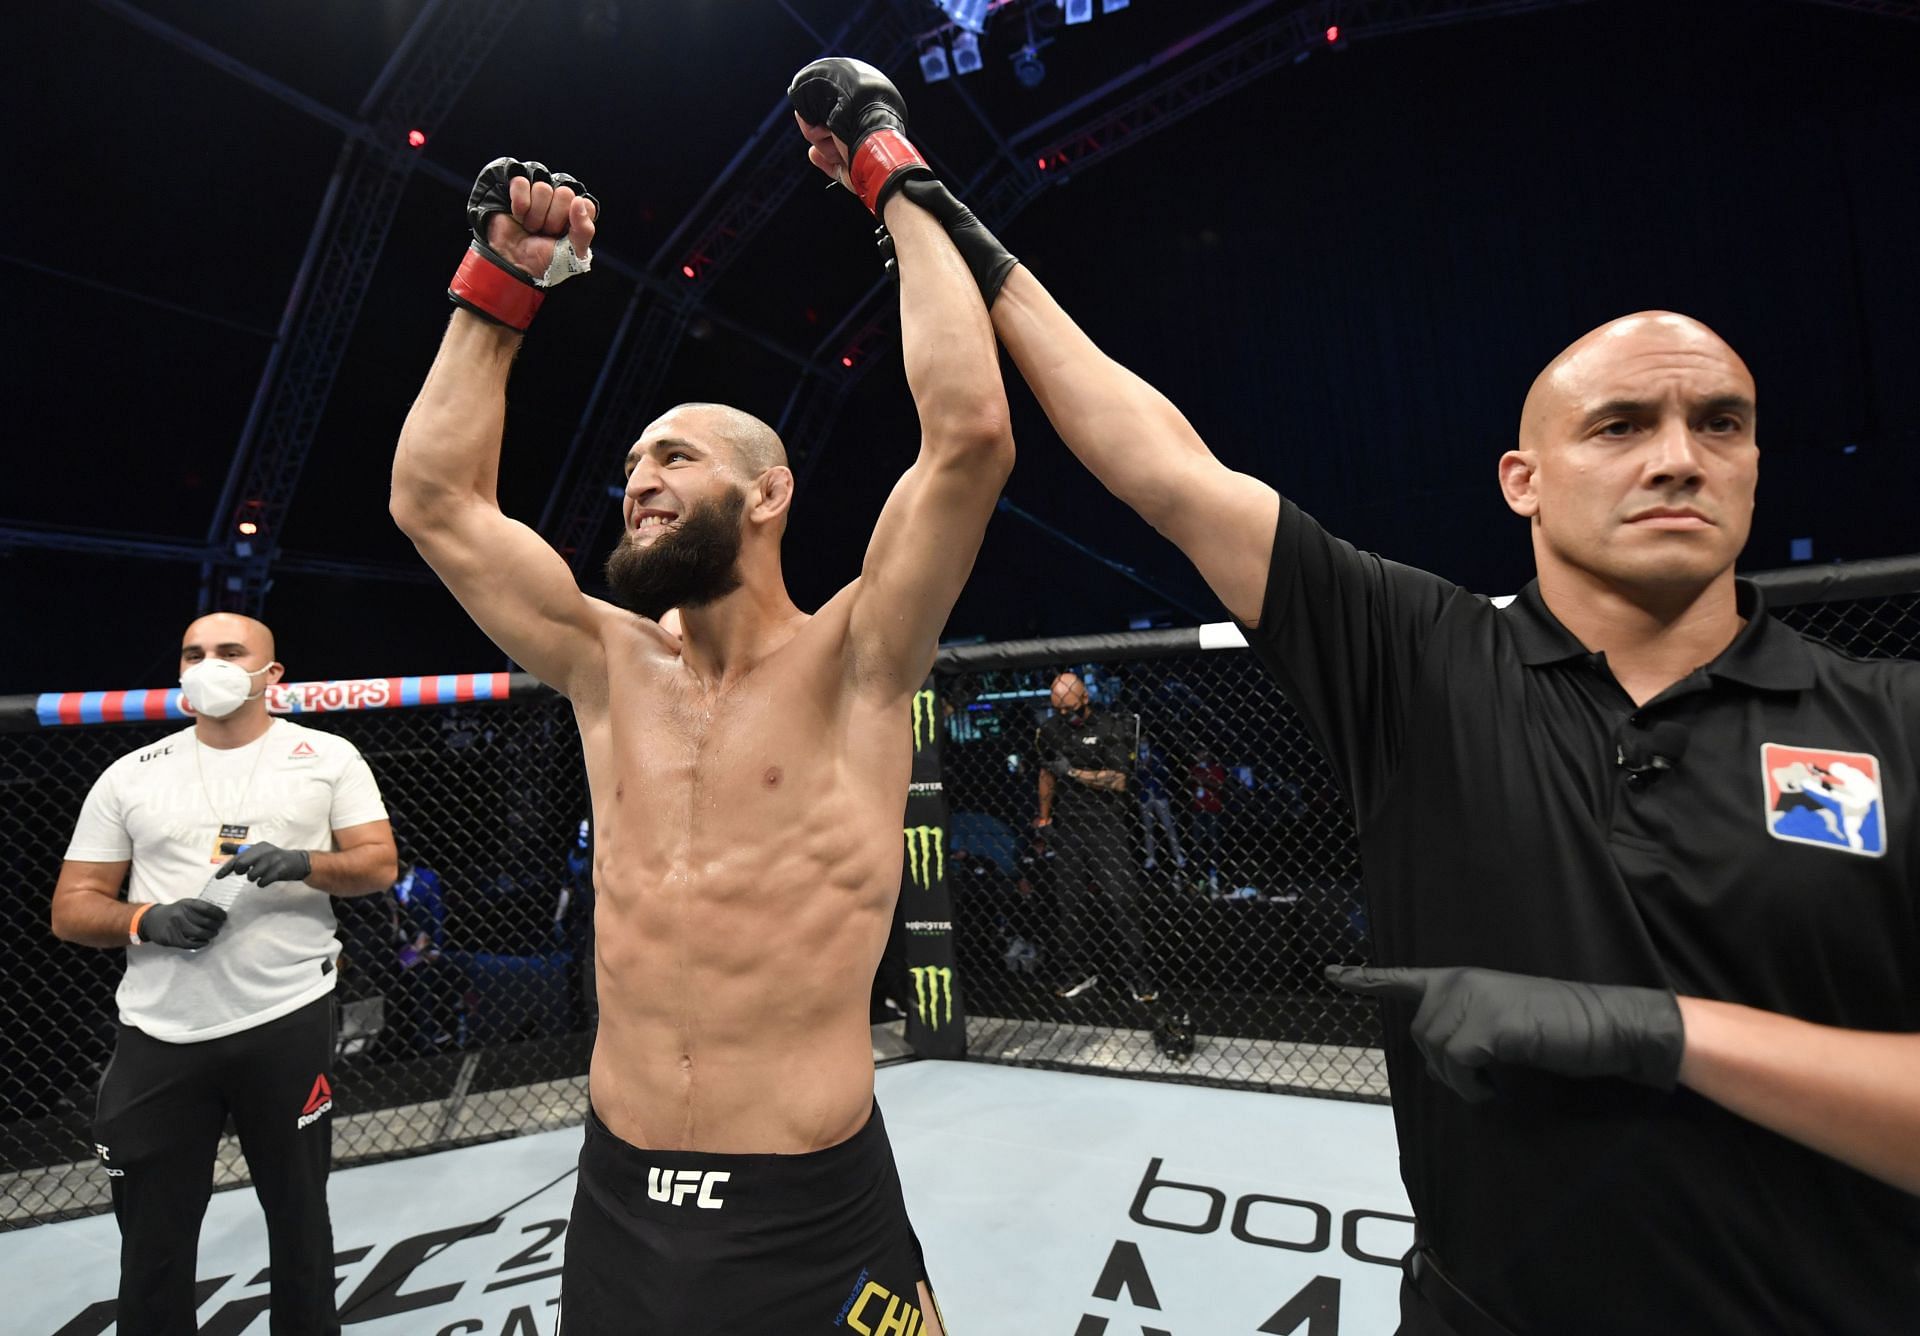 Khamzat Chimaev has wasted no time in becoming a genuine UFC star